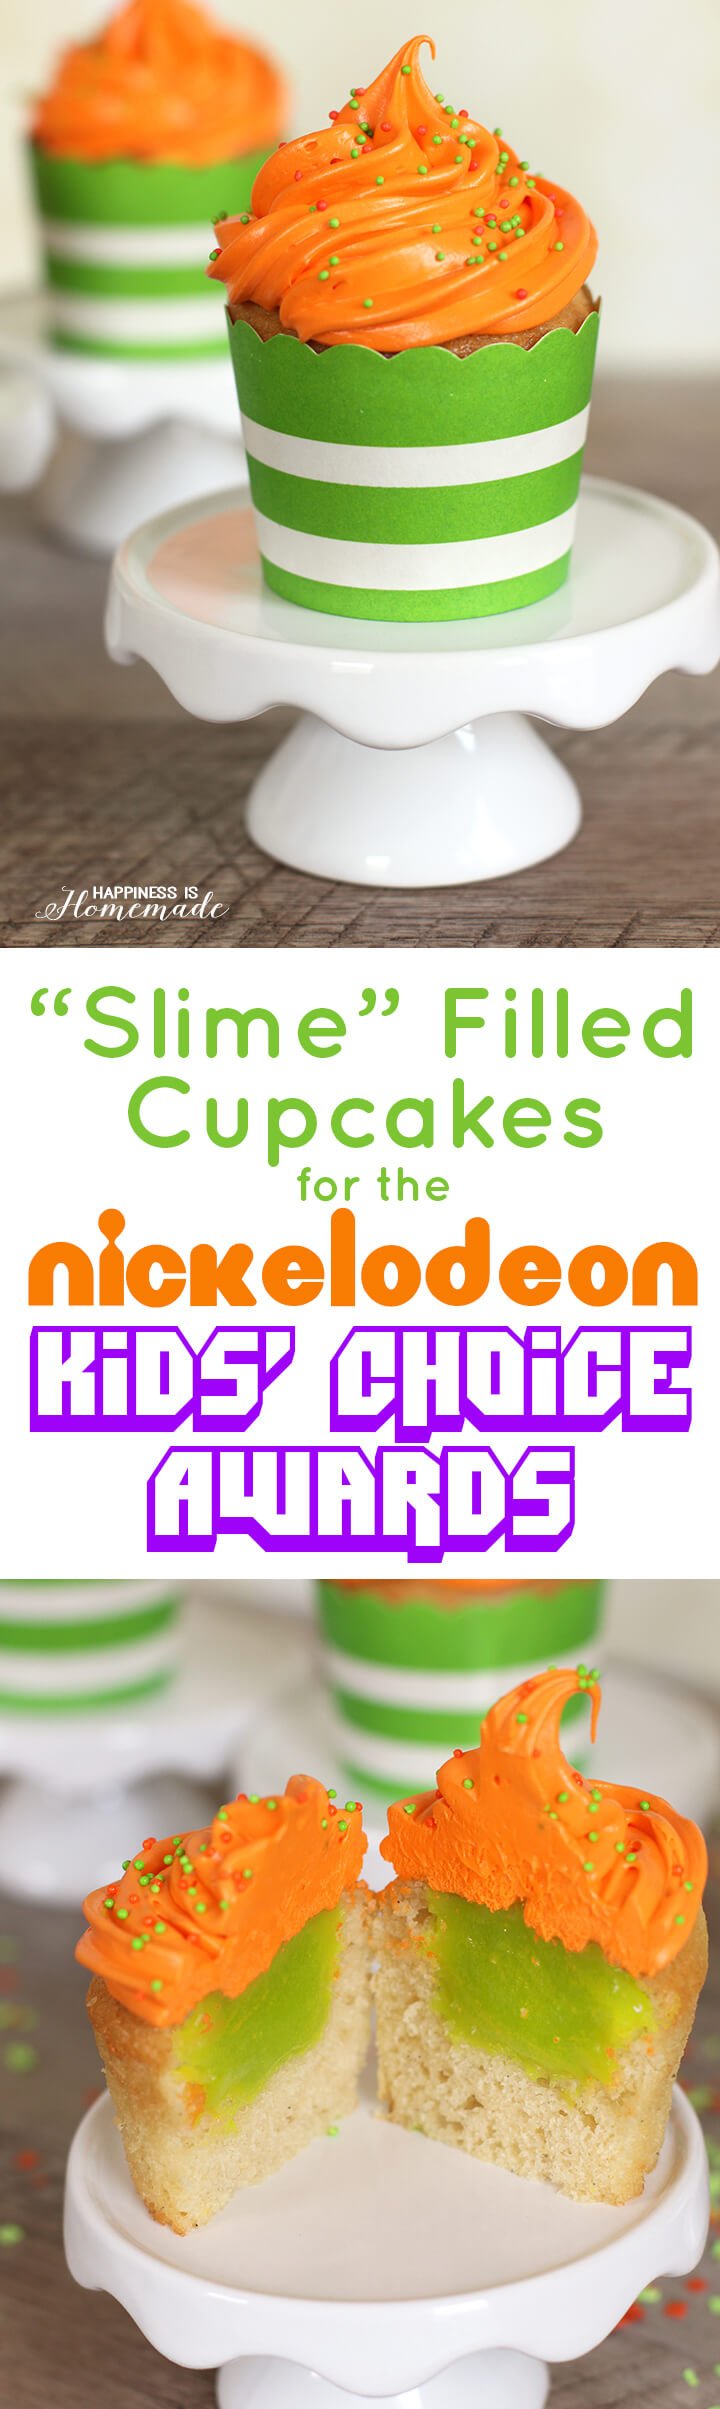 Slime Filled Cupcakes for the Nickelodeon Kids Choice Awards